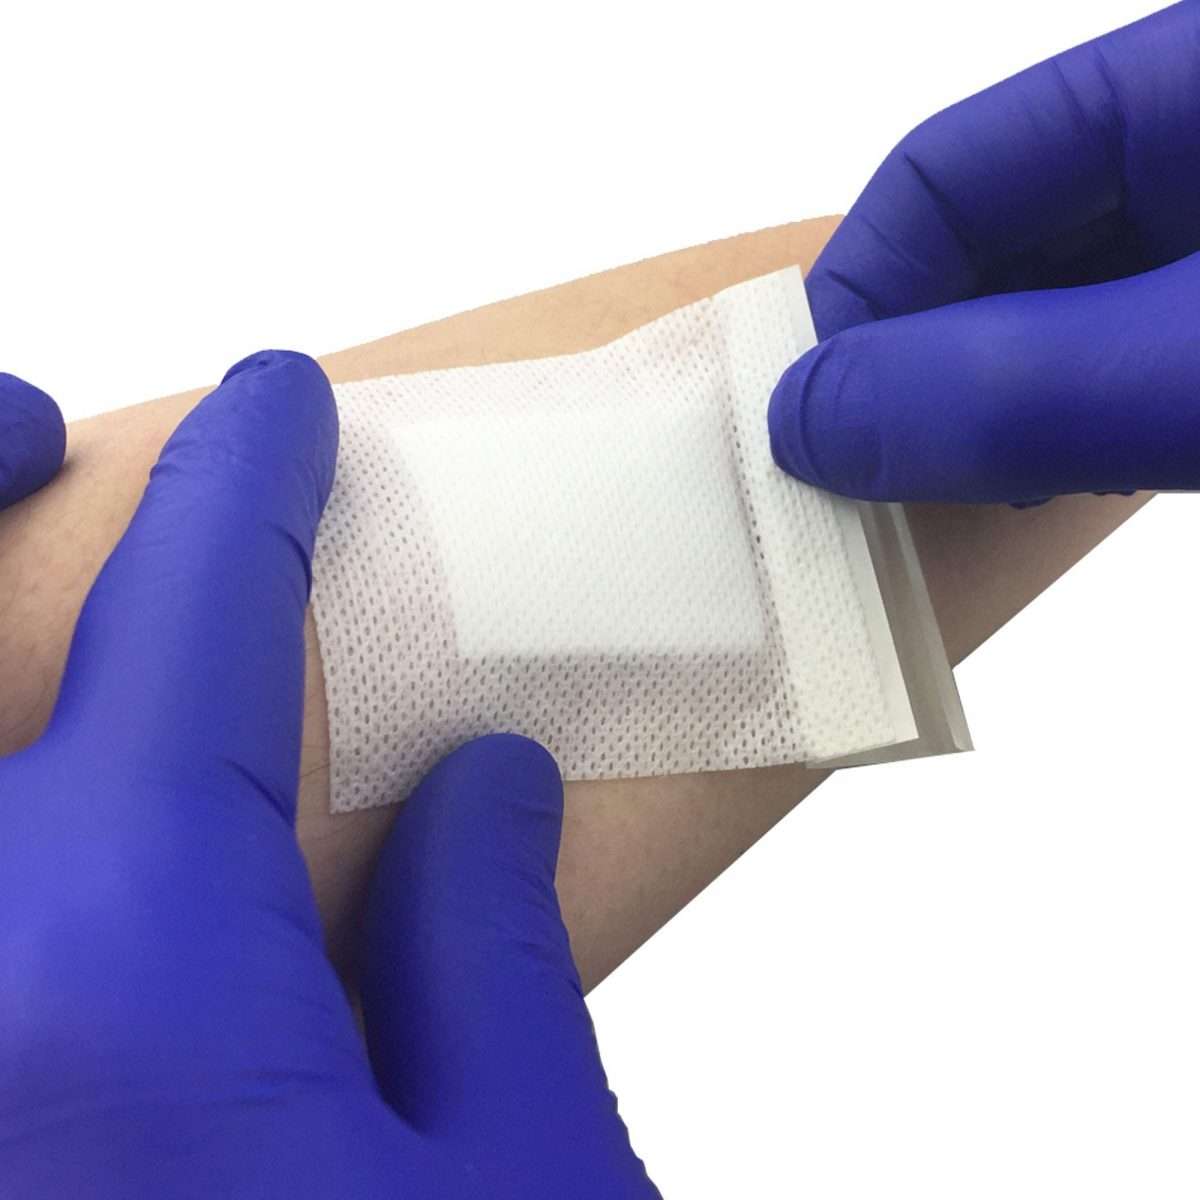 Pack of 10 Adhesive Sterile Wound Dressings